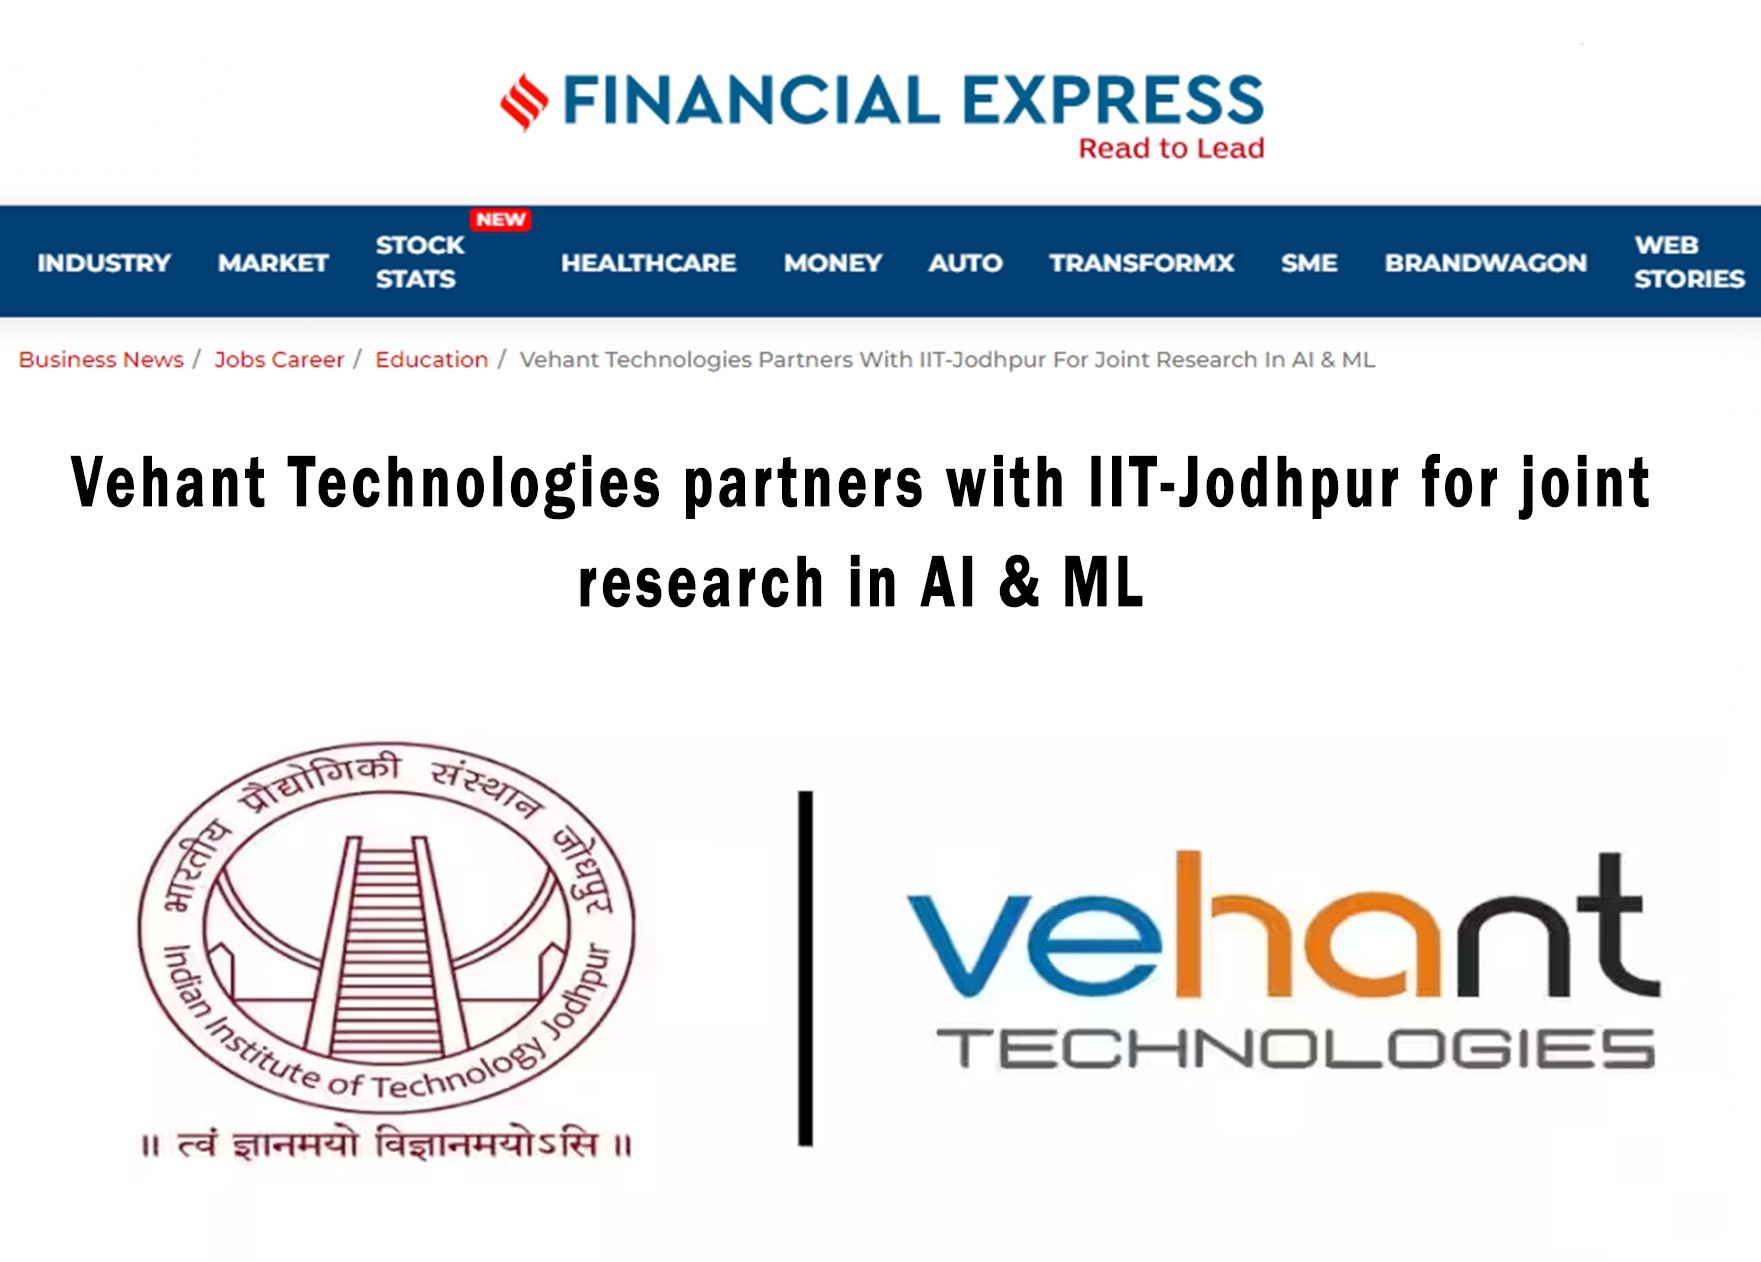 Vehant Technologies partners with IIT-Jodhpur for joint research in AI & ML